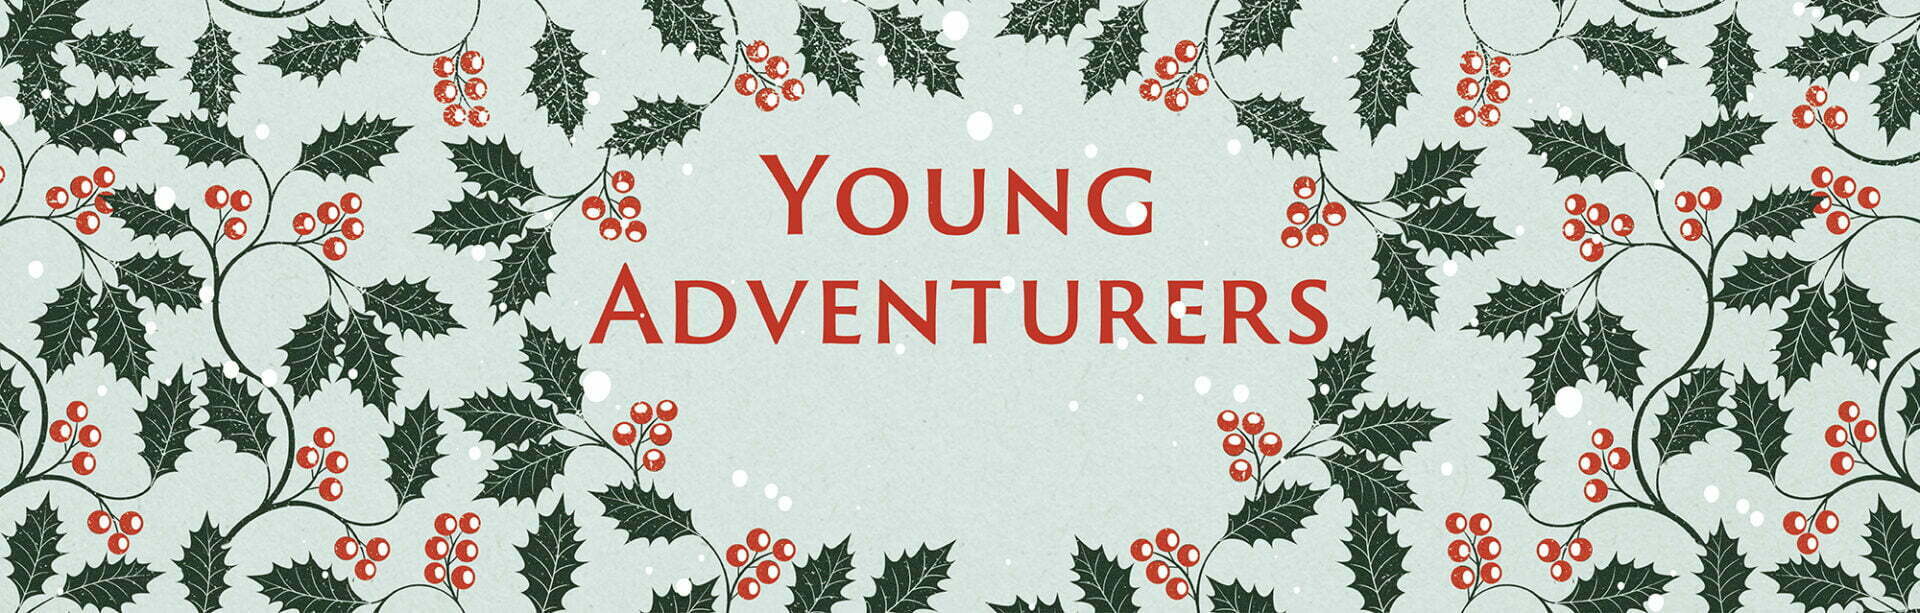 https://faber.wp.dev.diffusion.digital/wp-content/uploads/2021/11/Faber-Christmas-Gift-Guide-Young-Adventurers-3-1920x613.jpg